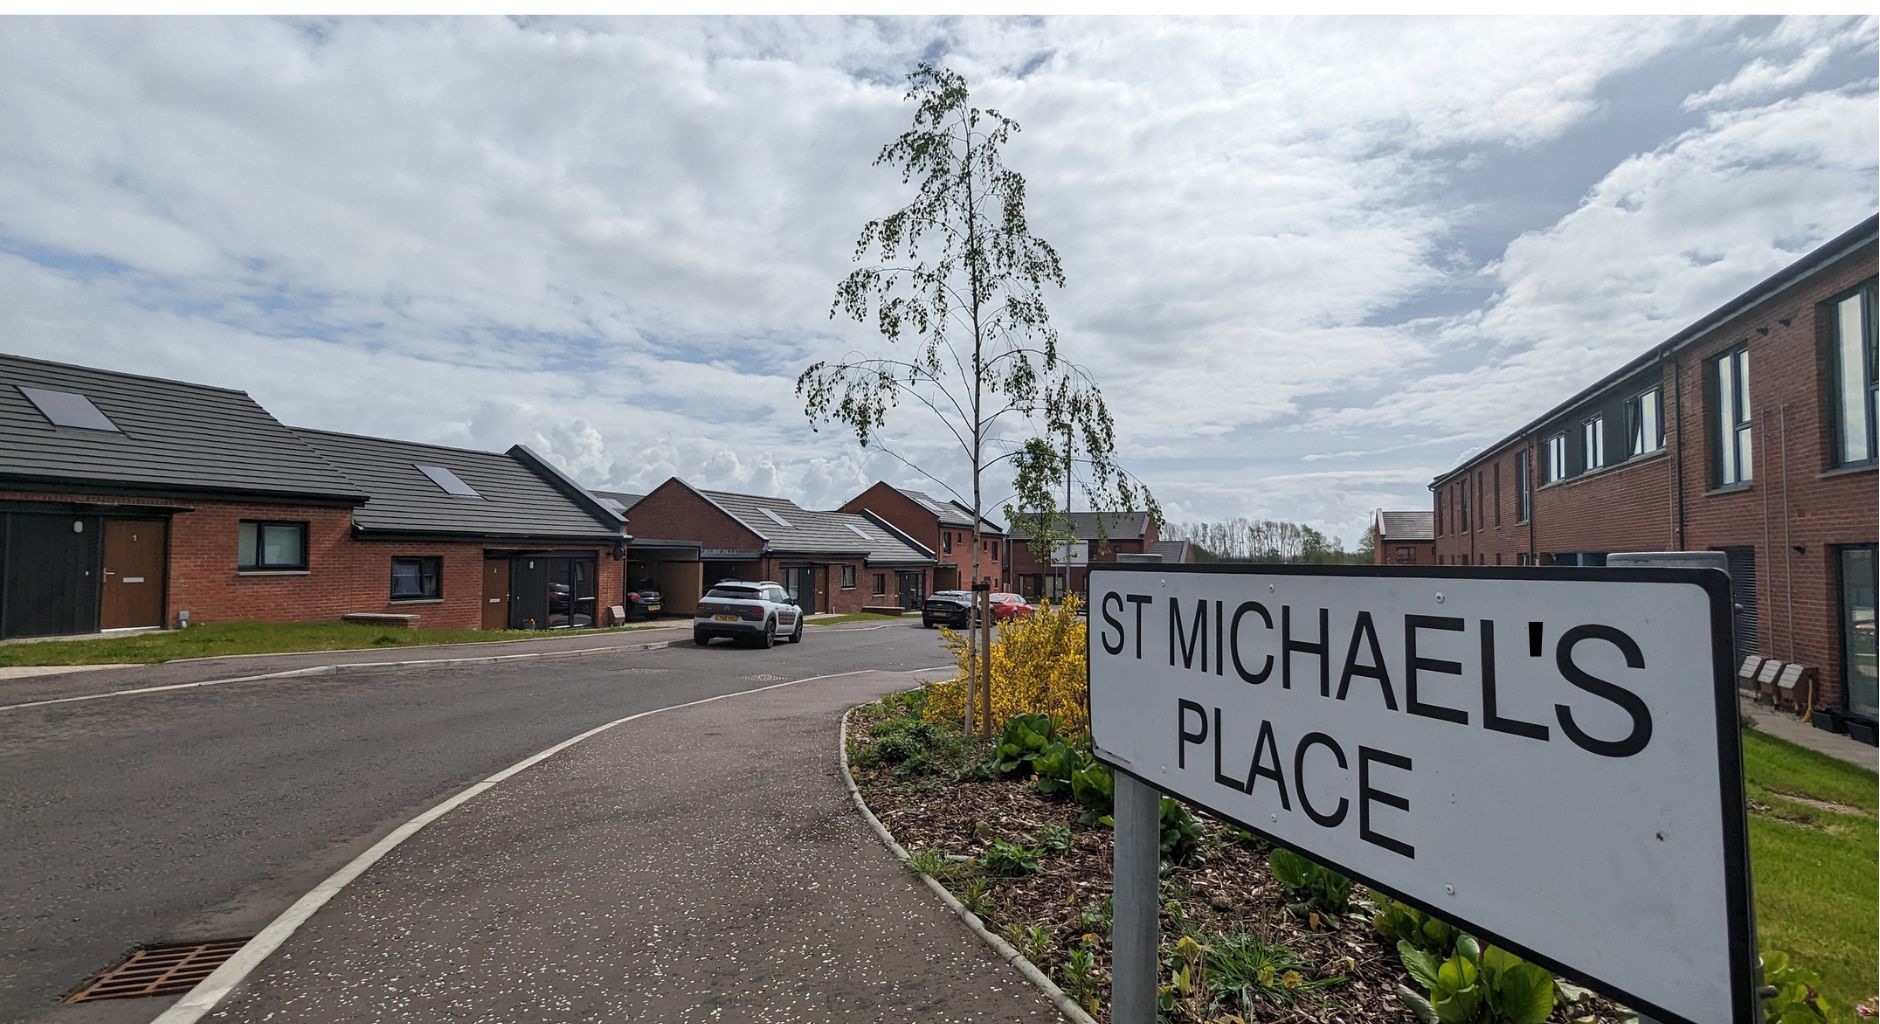 New council homes open in Kilwinning